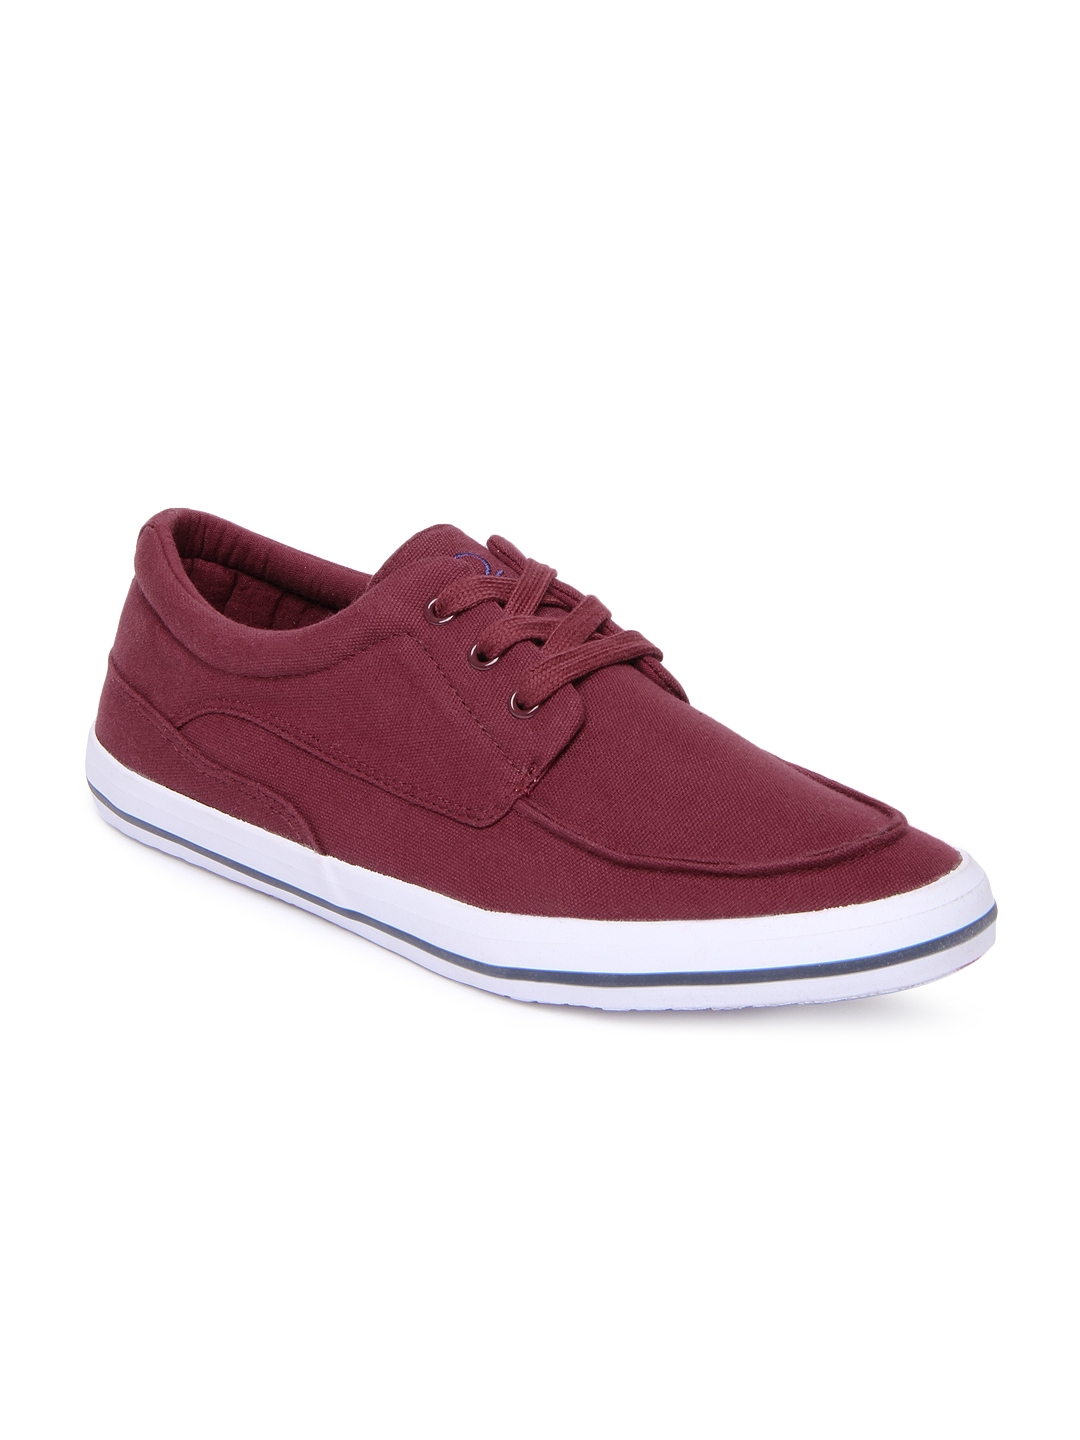 Buy United Colors Of Benetton Men Maroon Casual Shoes - Casual Shoes ...